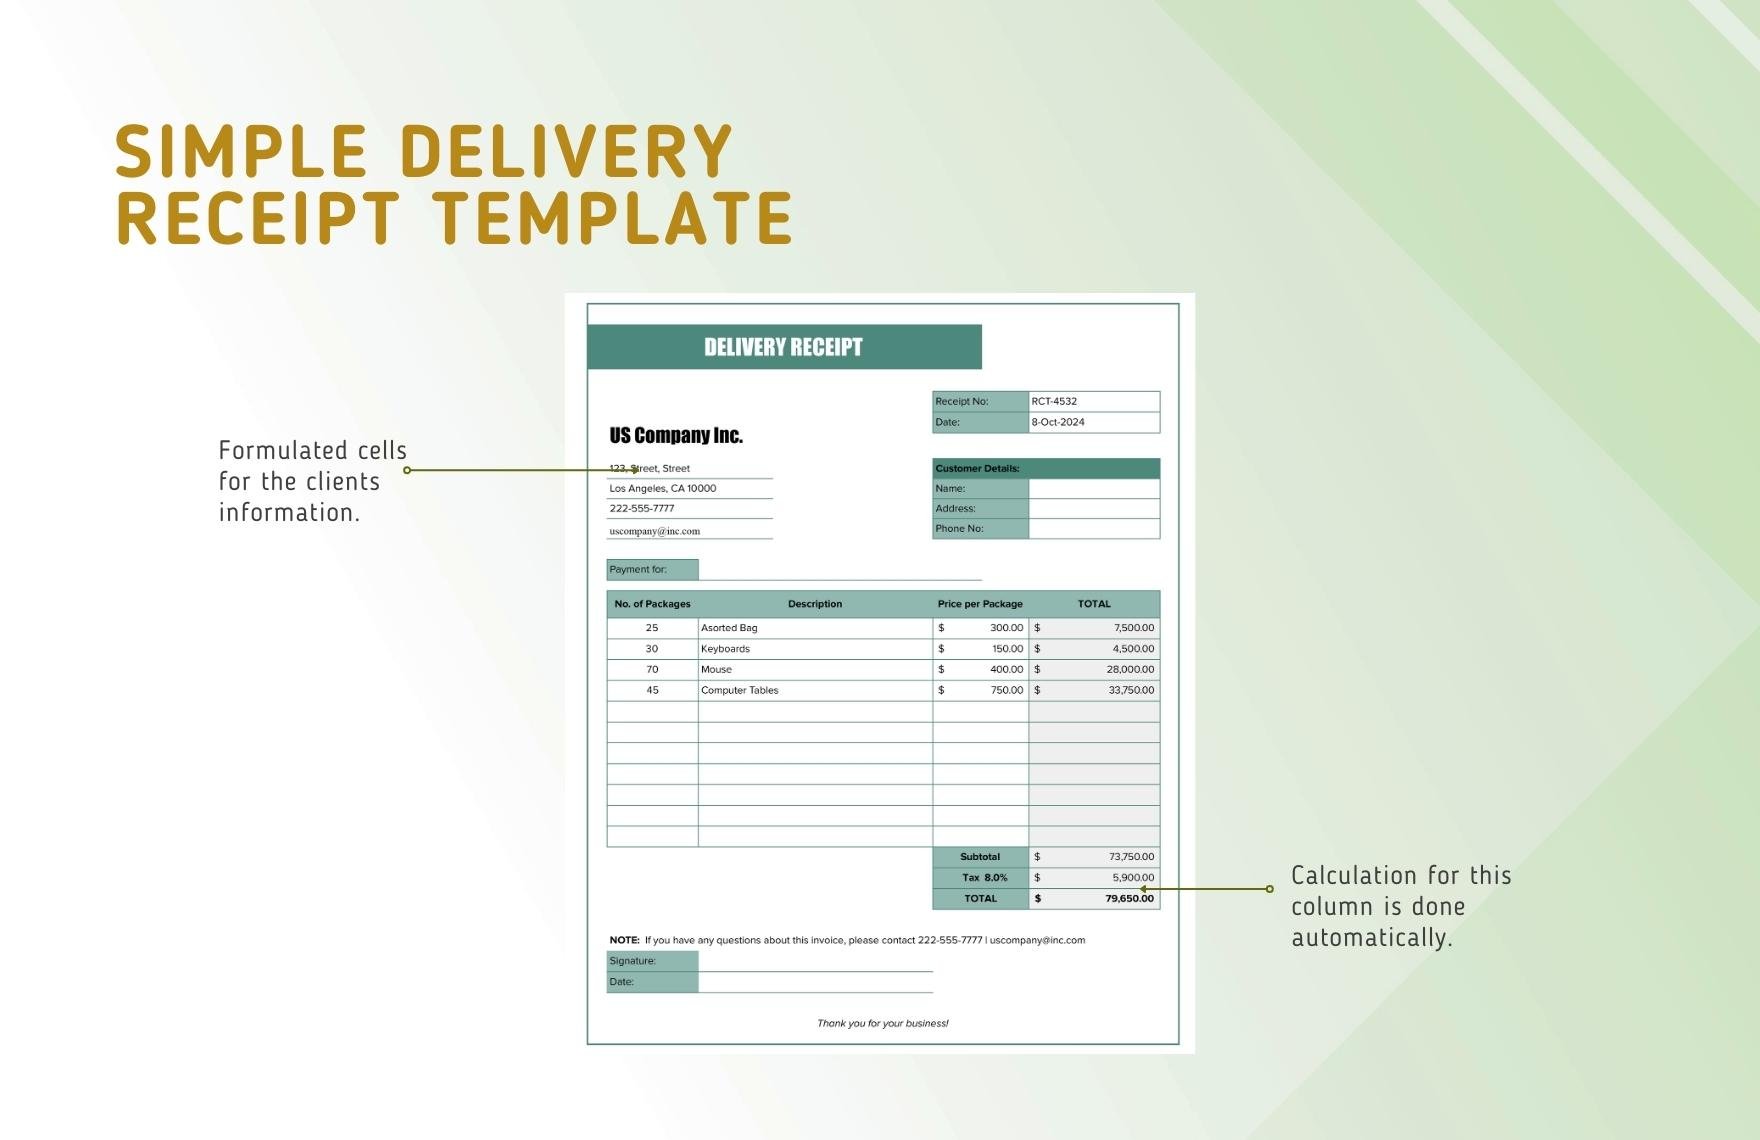 Simple Delivery Receipt Template